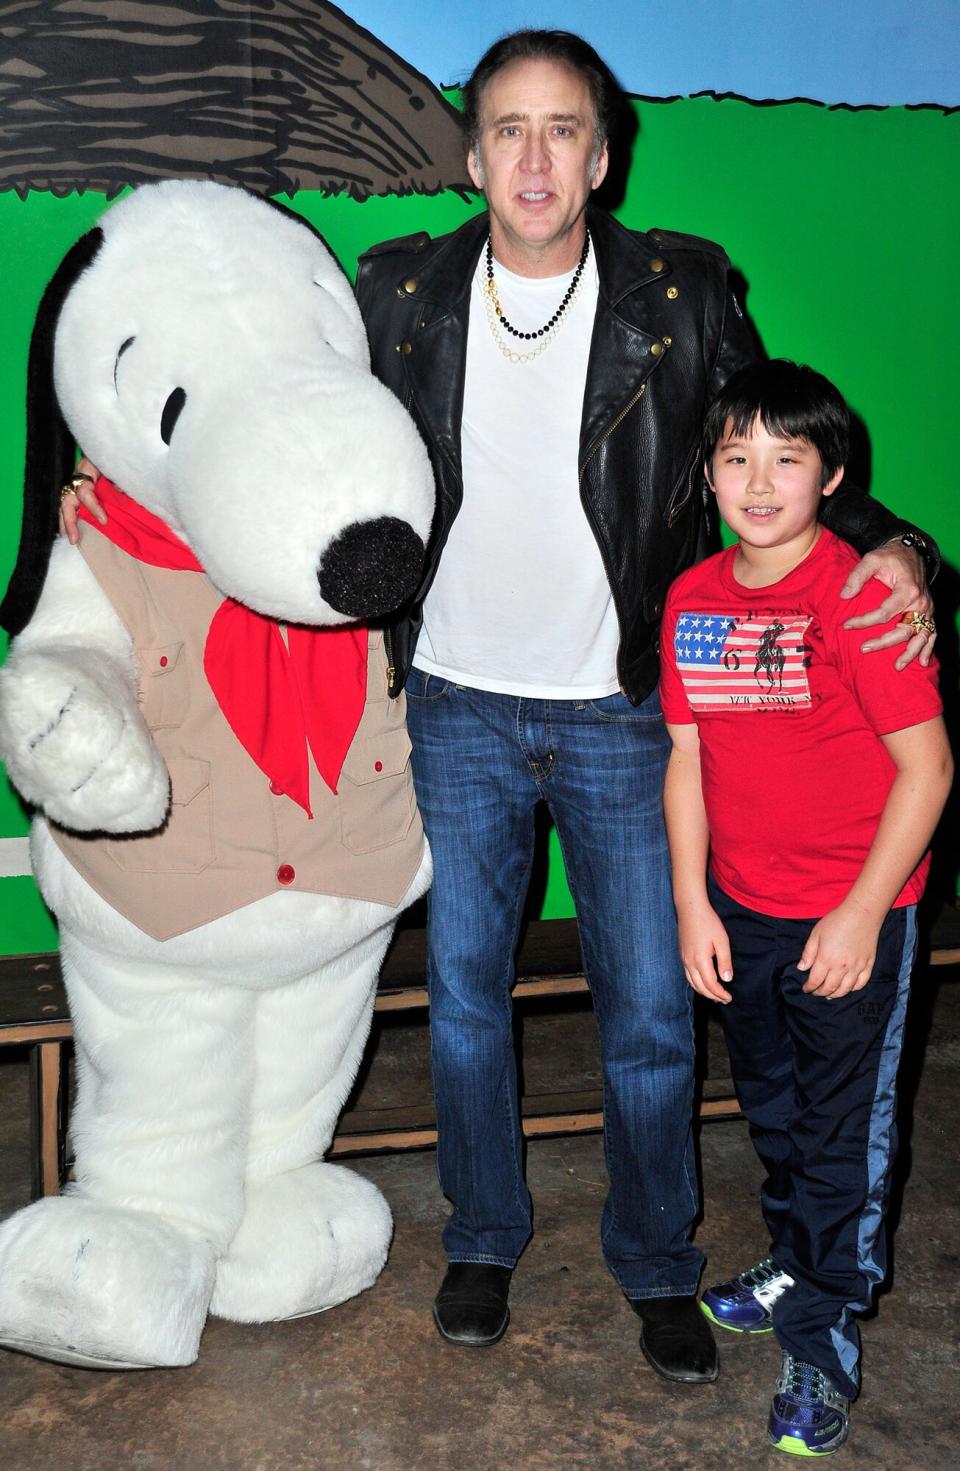 Nicolas Cage and son Kal-El Cage visit Knott's Berry Farm on September 12, 2015 in Buena Park, California